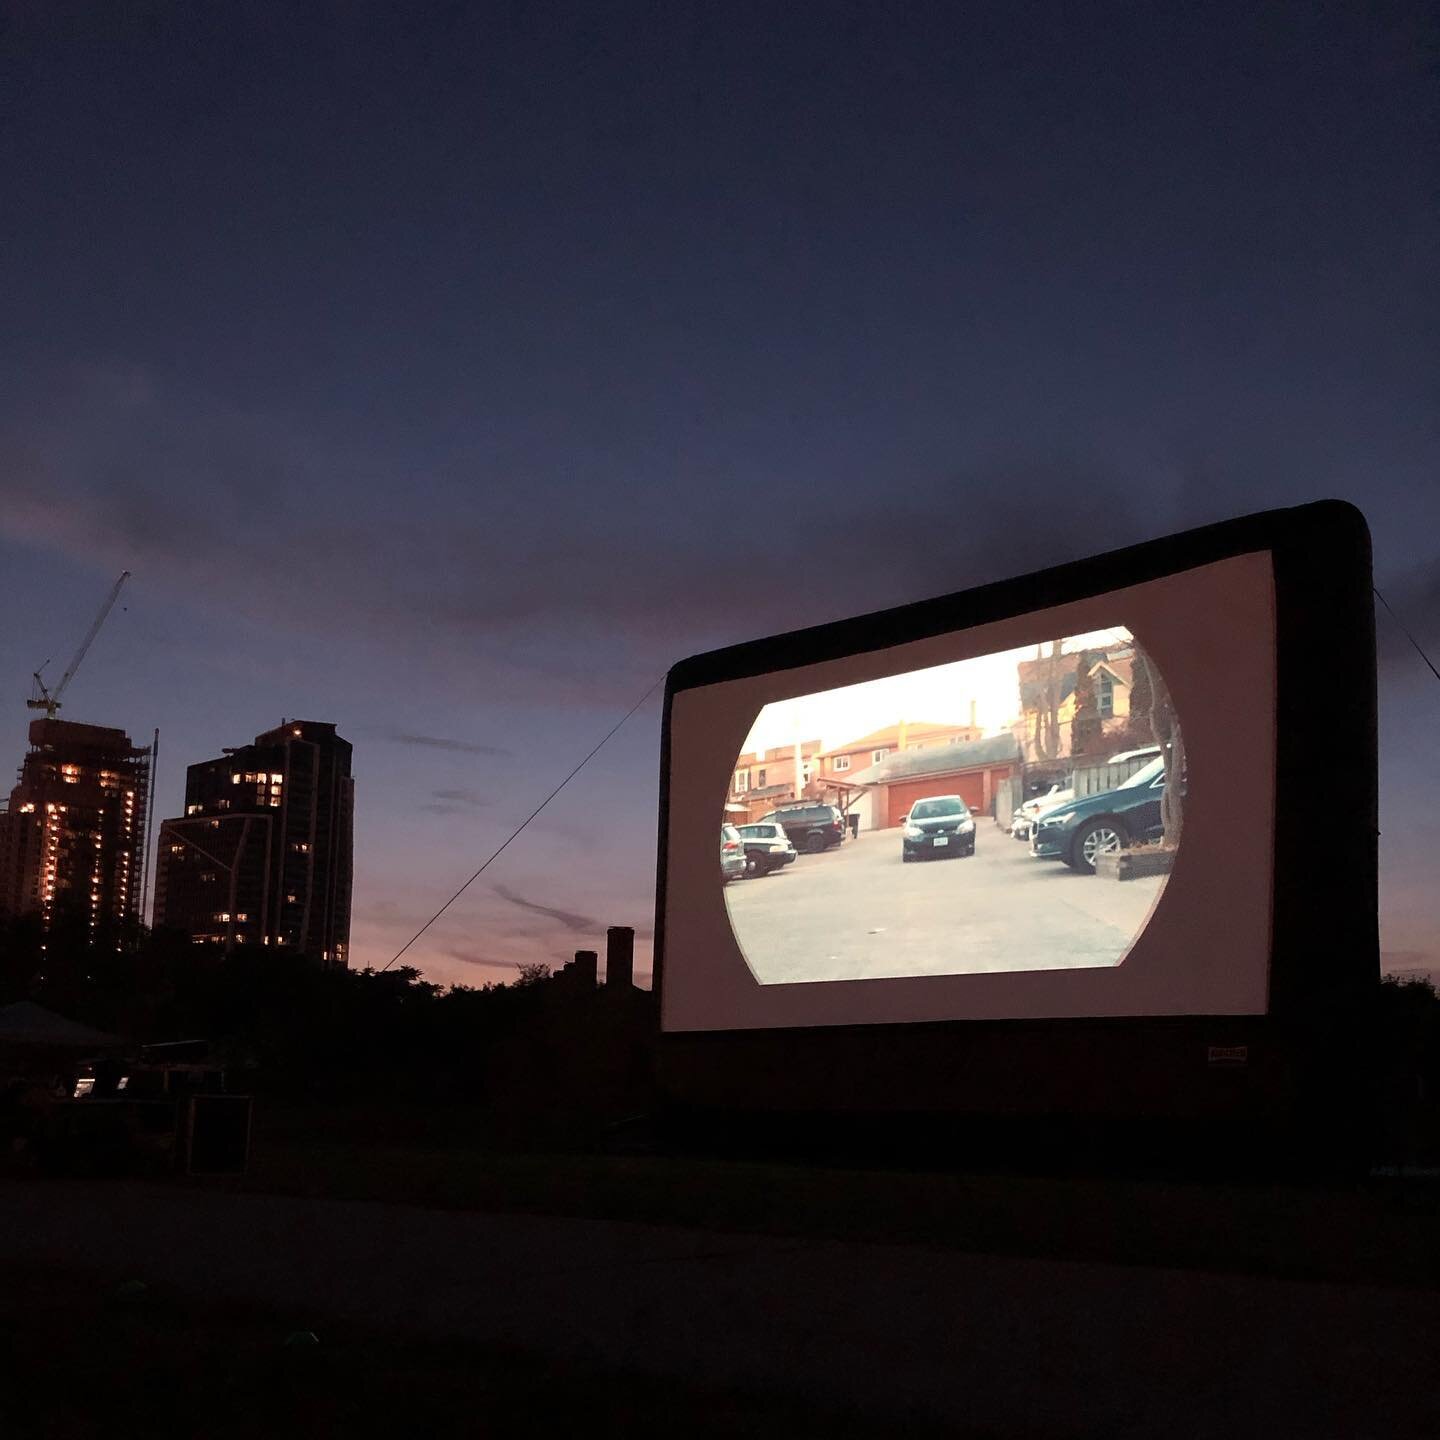 We&rsquo;re really loving these sunsets at @fortyork, when some of our favourite shorts hit the big screen.
.
Pictured
1. TIPS ARE APPRECIATED (Trevor Anderson)
2. THE DROP IN (Naledi Jackson)
3. SAVAGE (Lisa Jackson)
.
#TOPSturns10 #fortyork